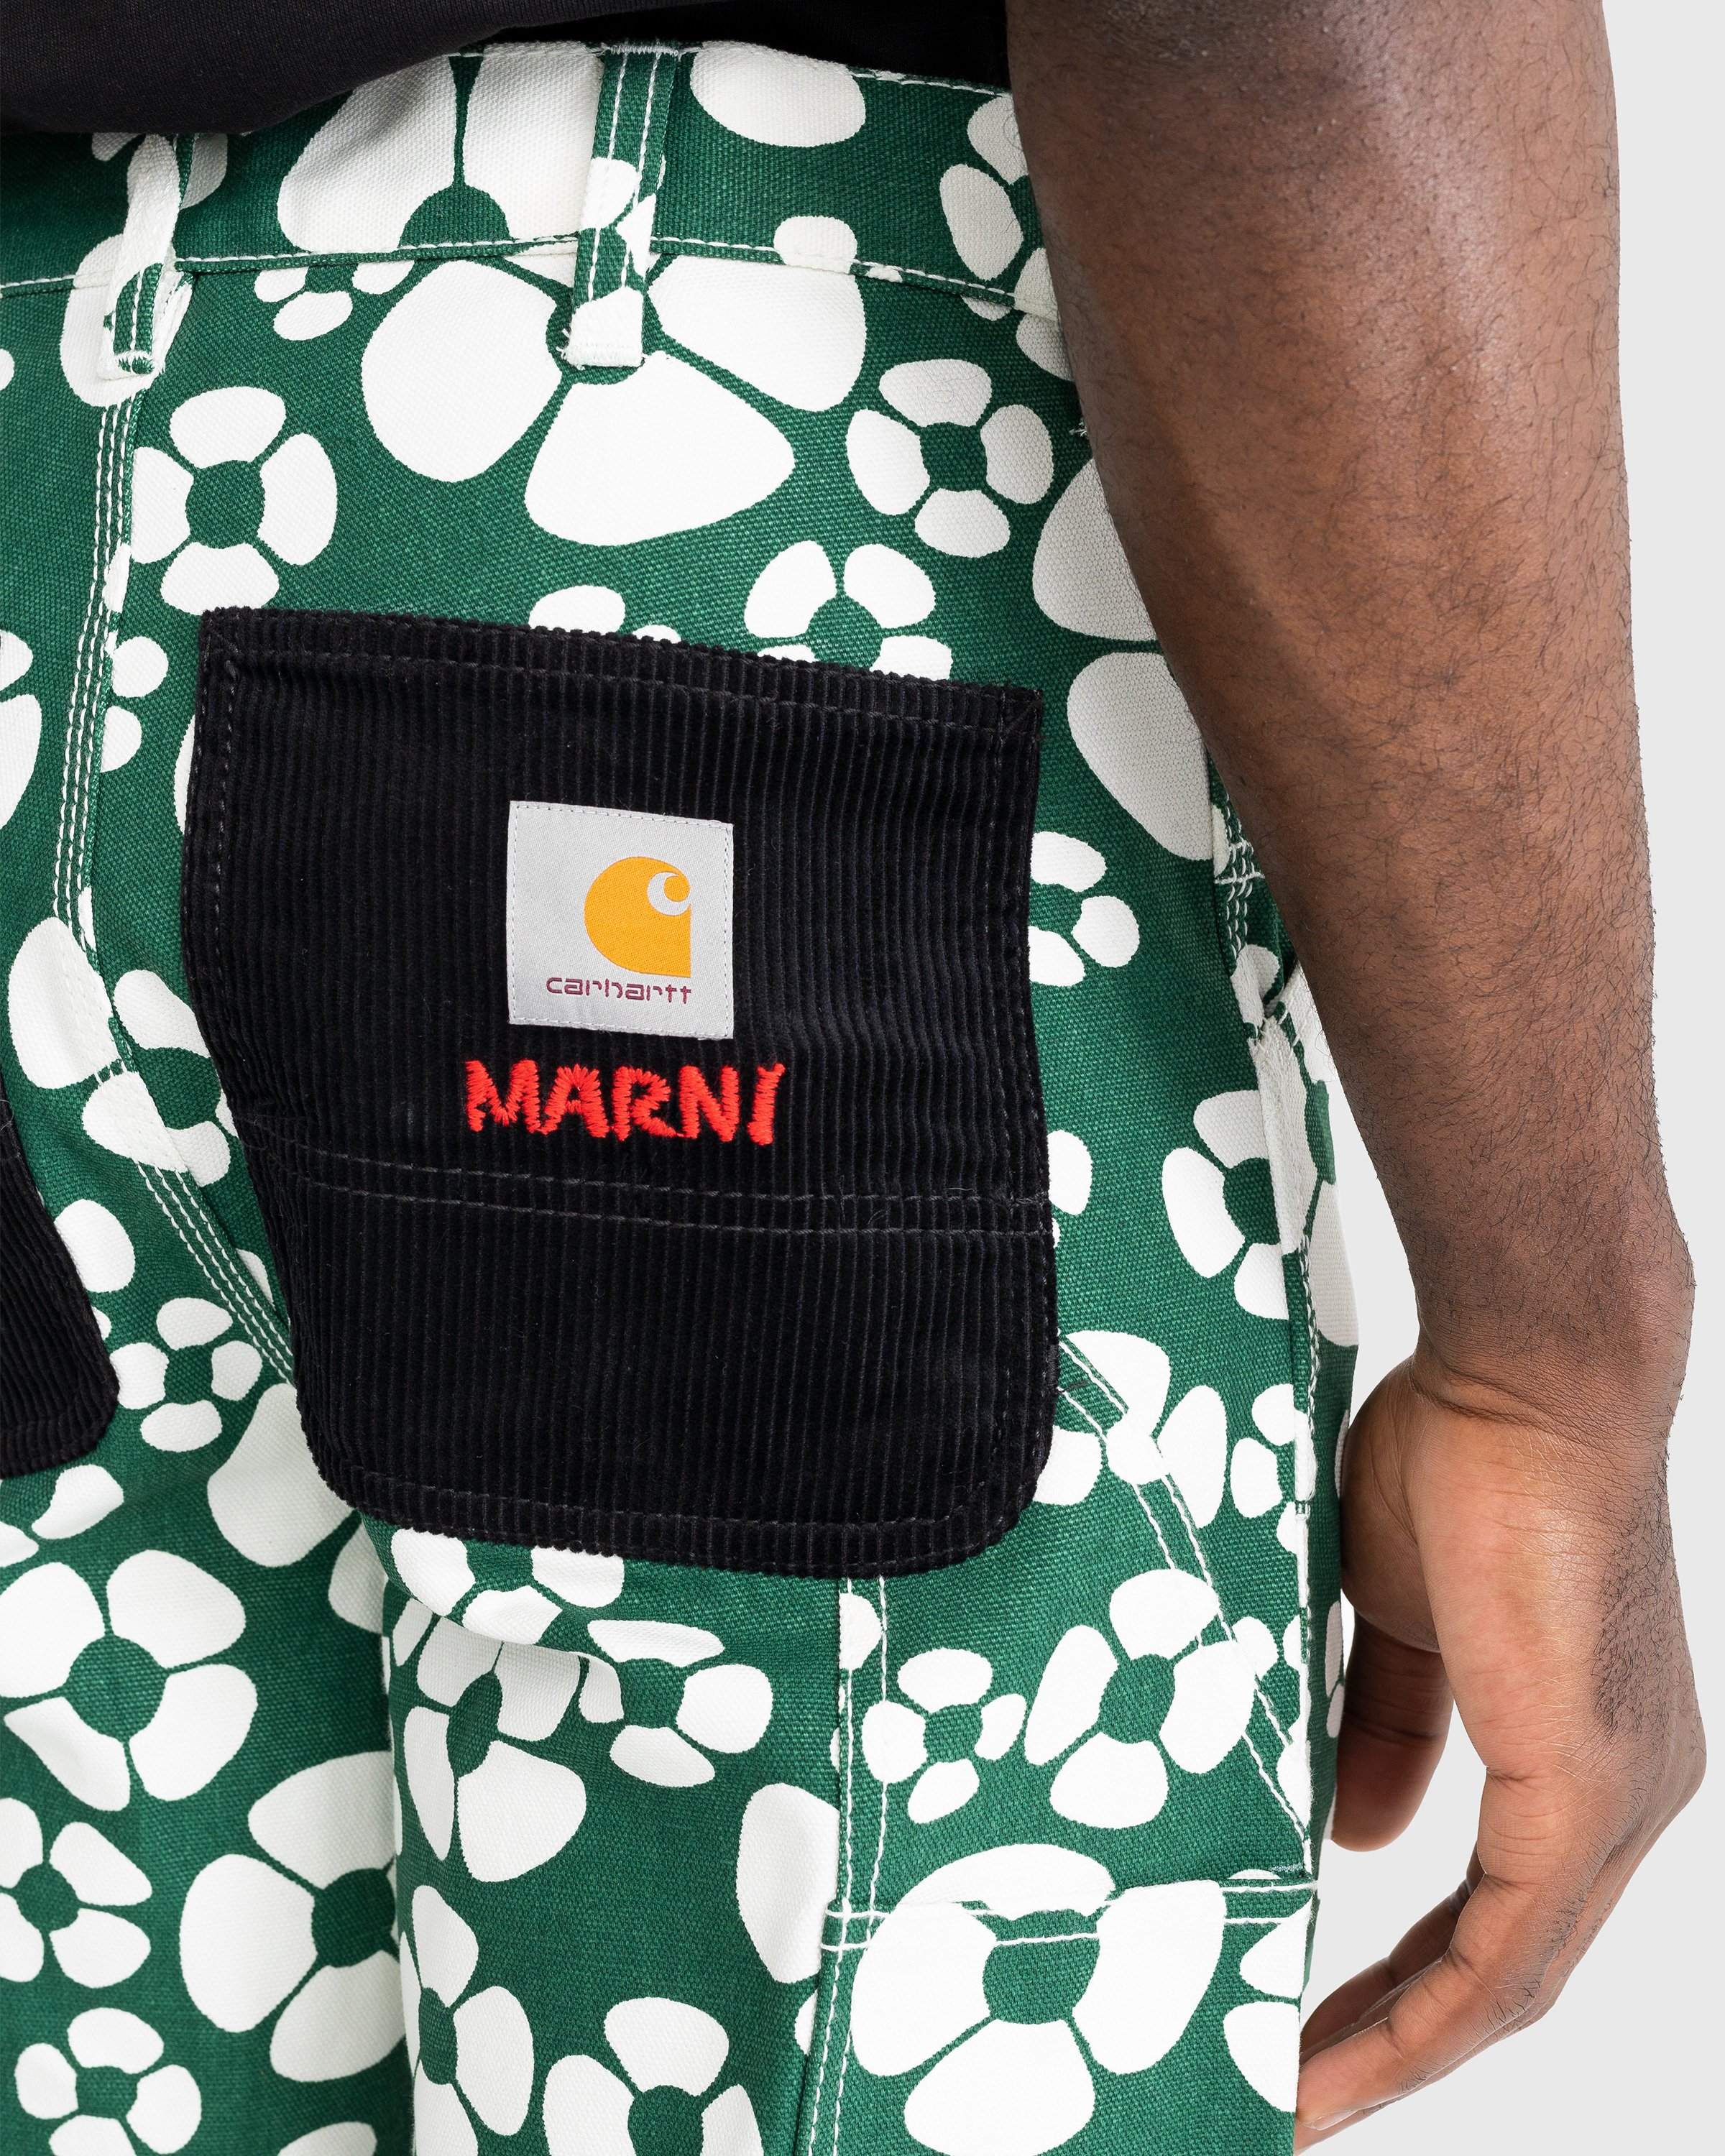 Marni x Carhartt WIP - Floral Trousers Green - Clothing - Green - Image 7